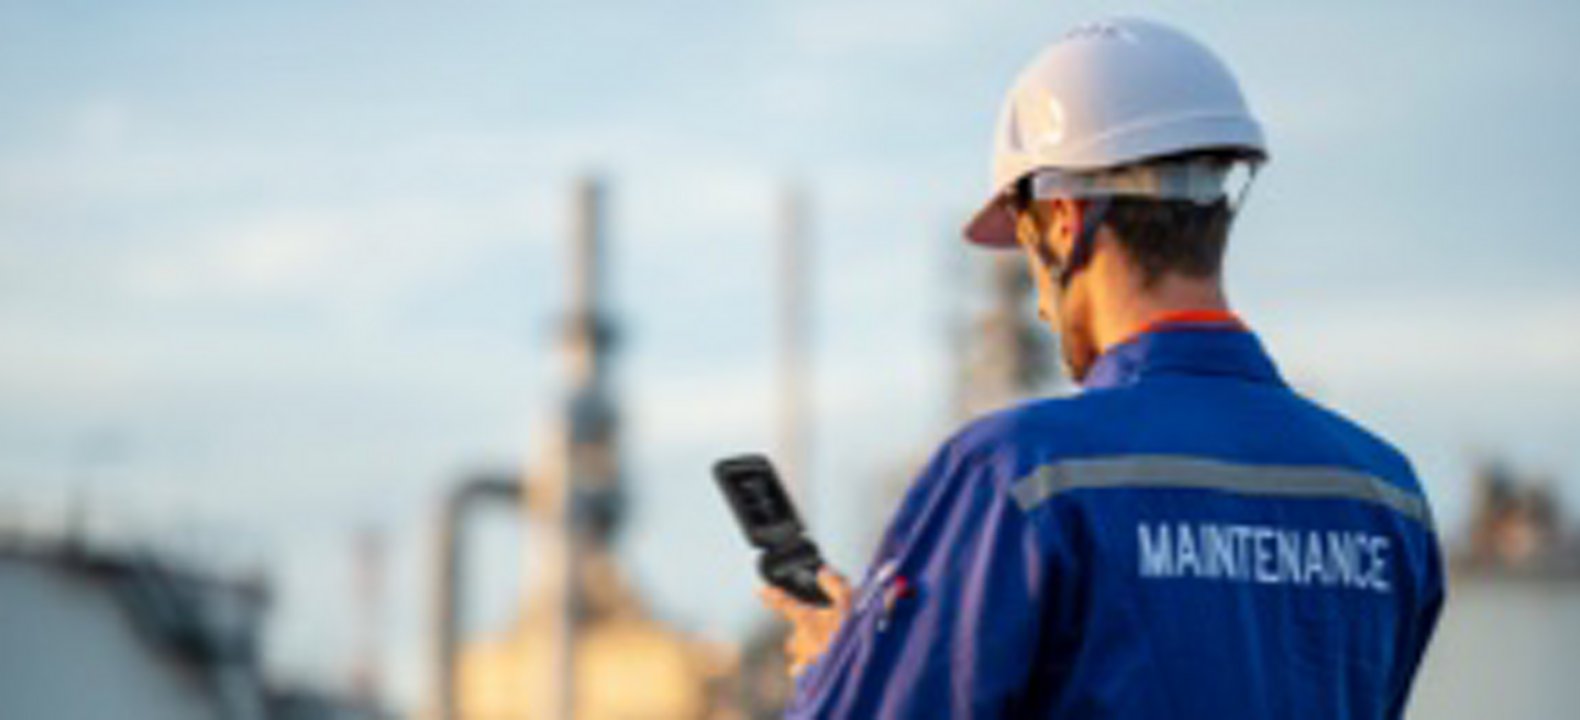 Man in white hard hat with blue maintenance uniform looks down at smartphone